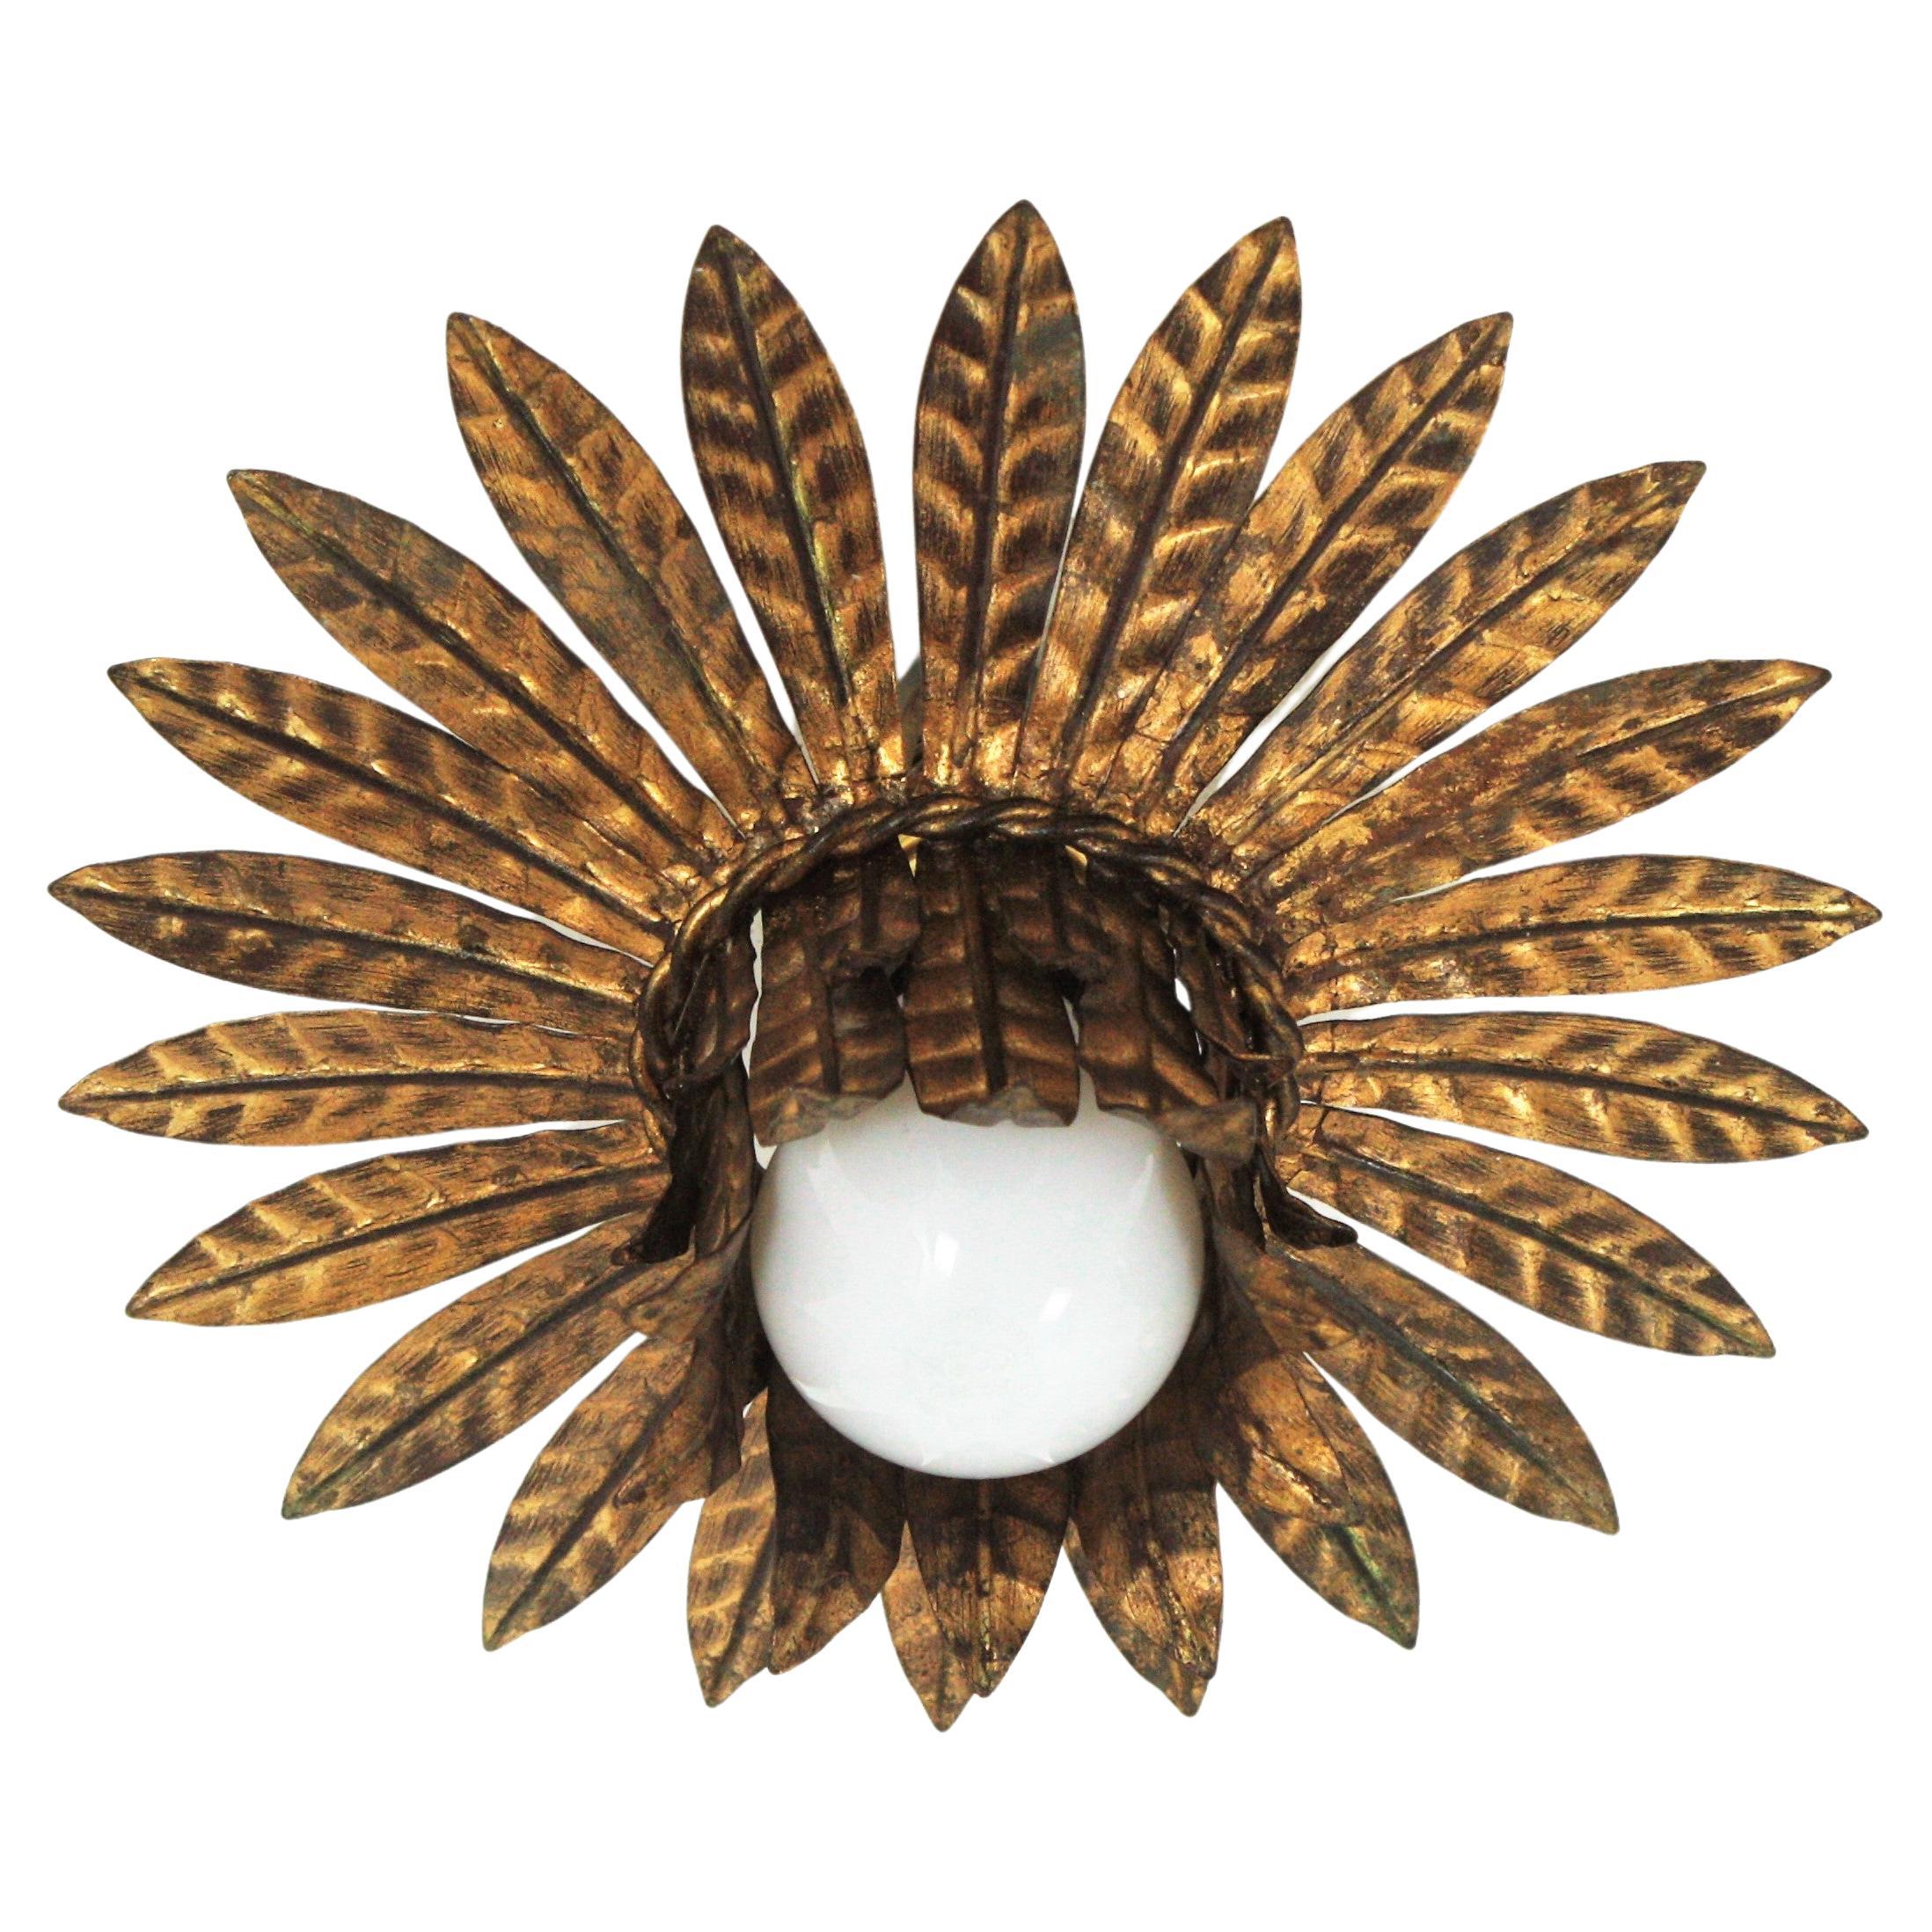 French Leaves Bouquet Crown Ceiling Light Fixture in Gilt Iron, 1940s For Sale